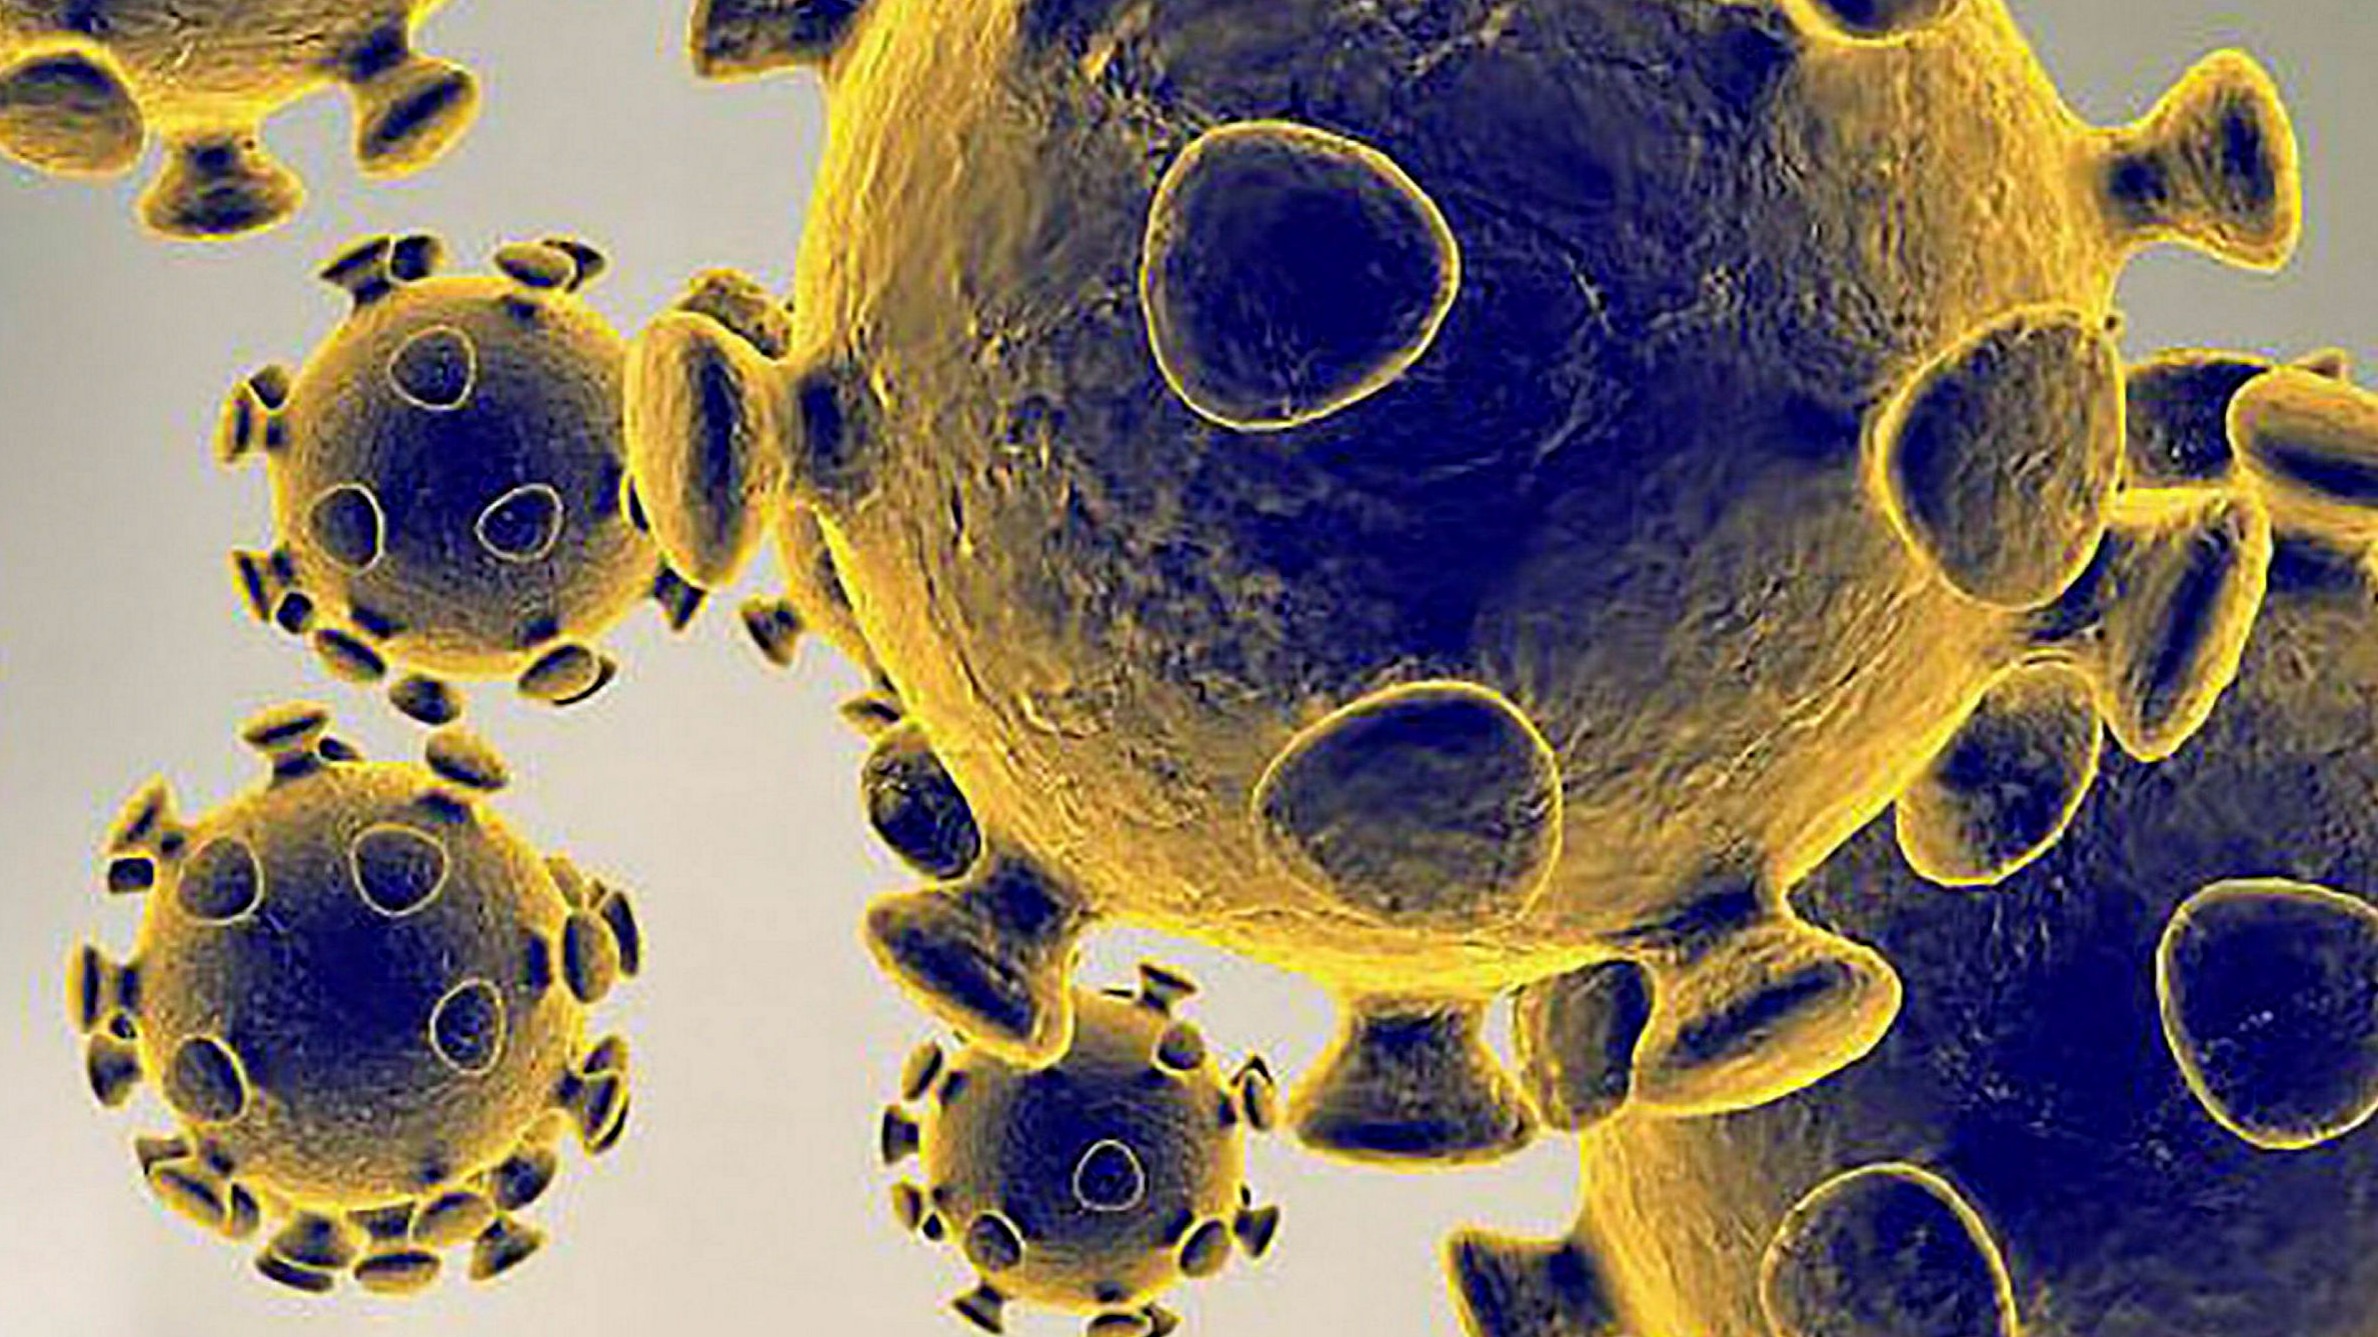 Peru's Ministry of Health on Friday confirmed the country's first case of the coronavirus variant first identified in the United Kingdom.